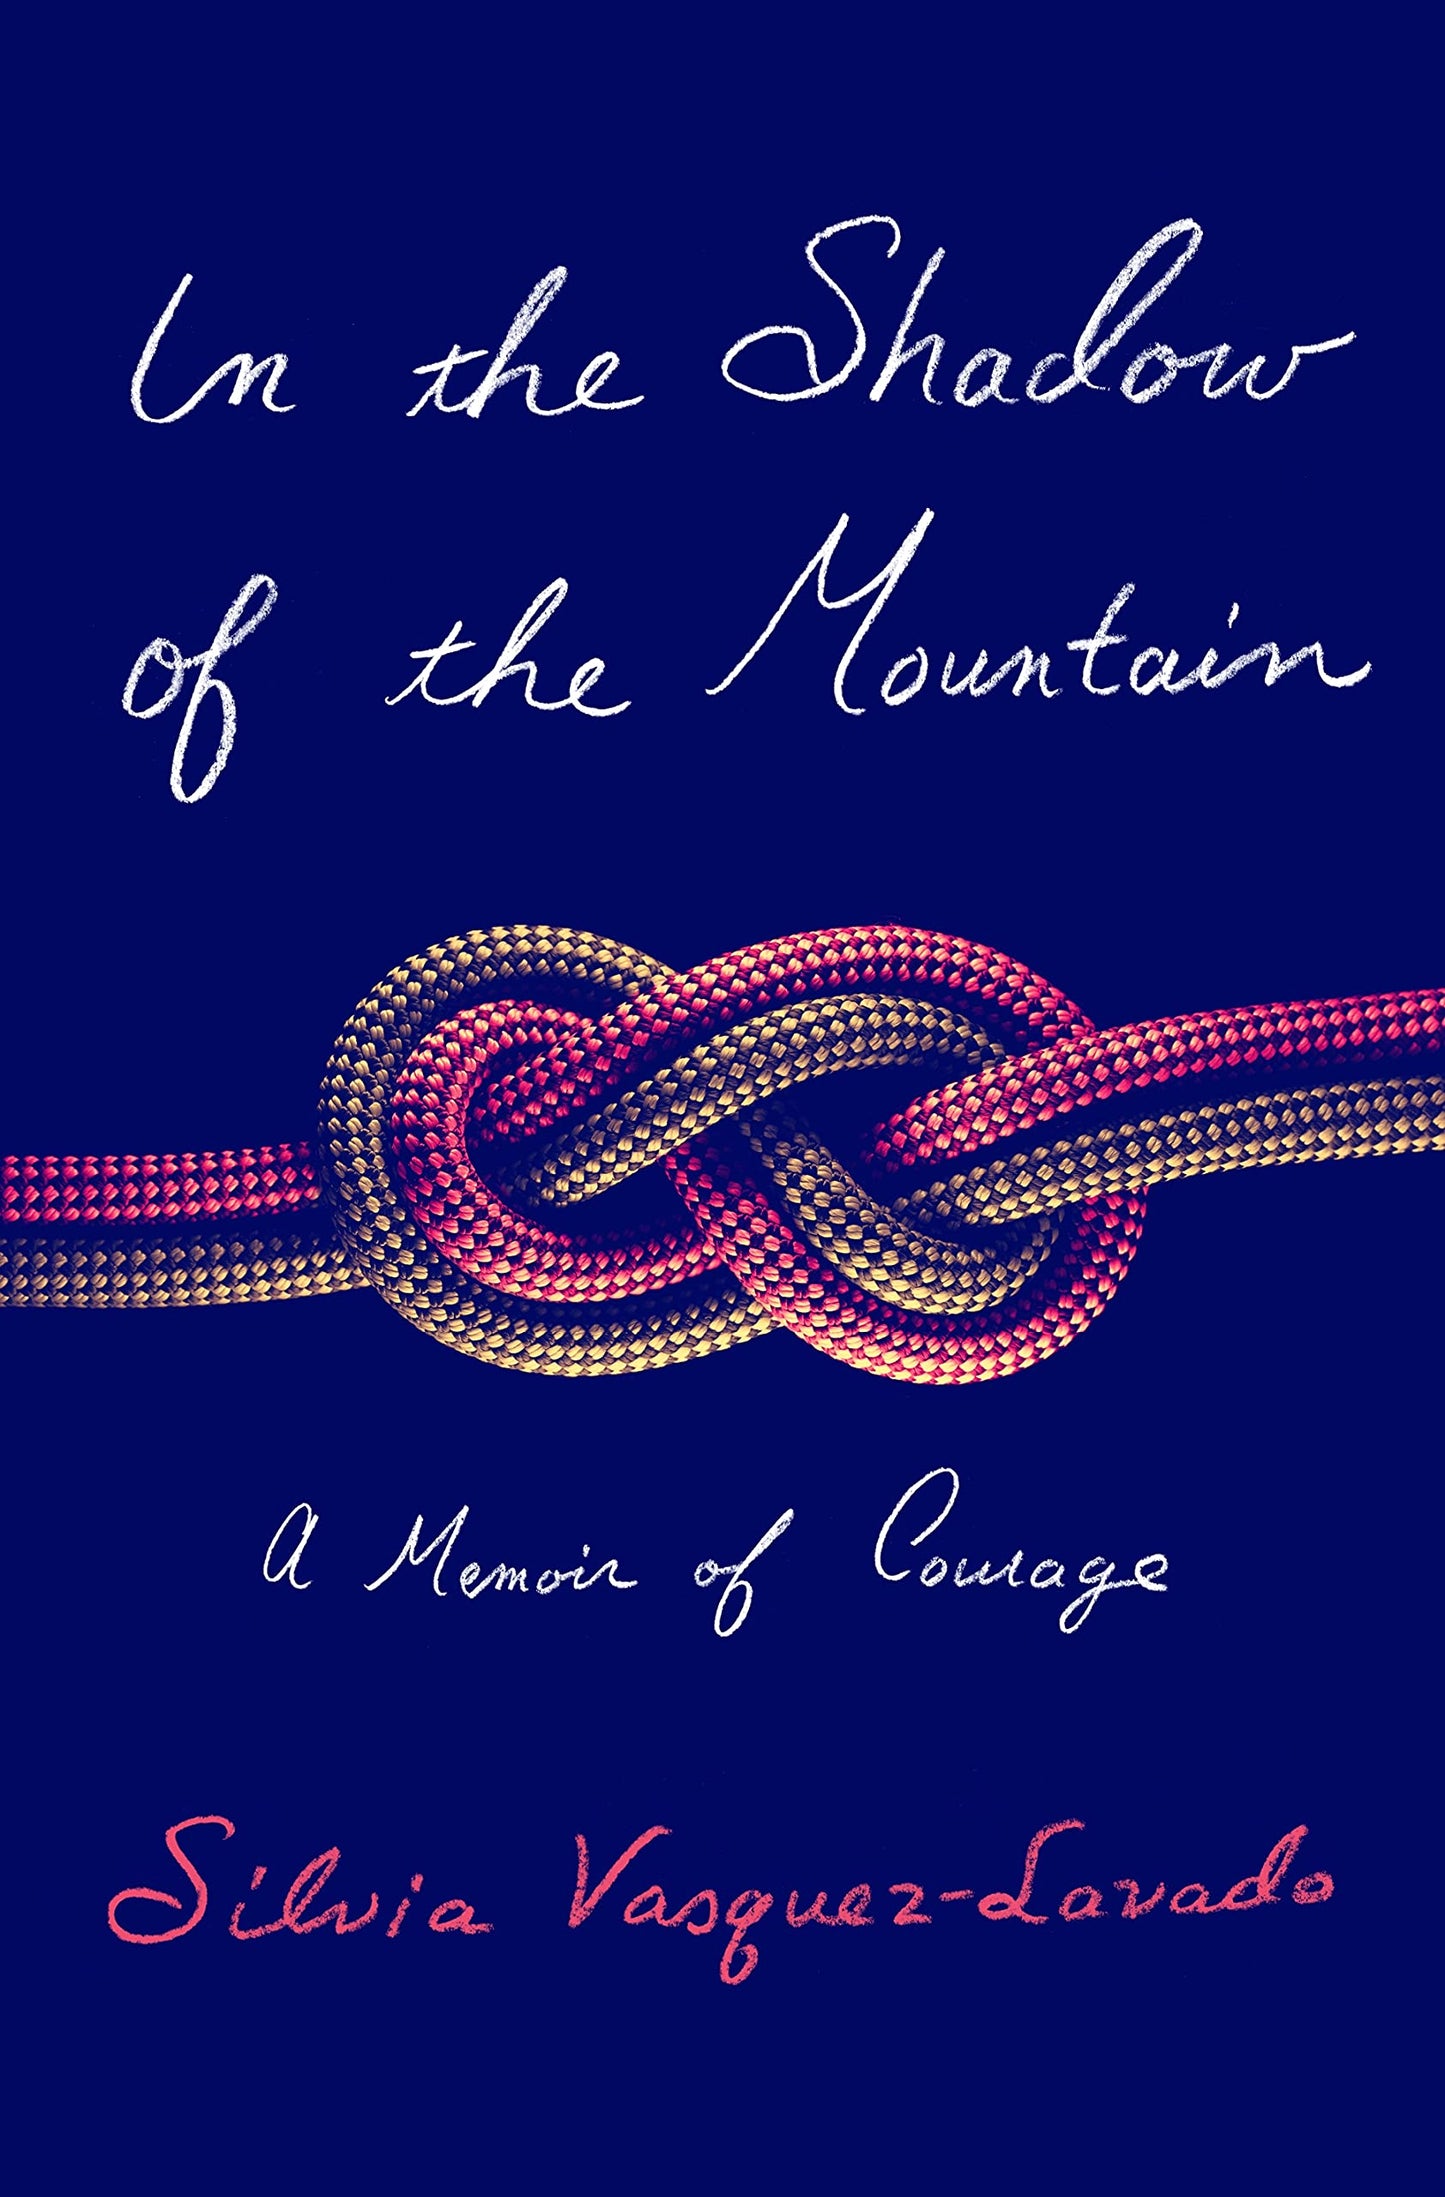 In the Shadow of the Mountain // A Memoir of Courage